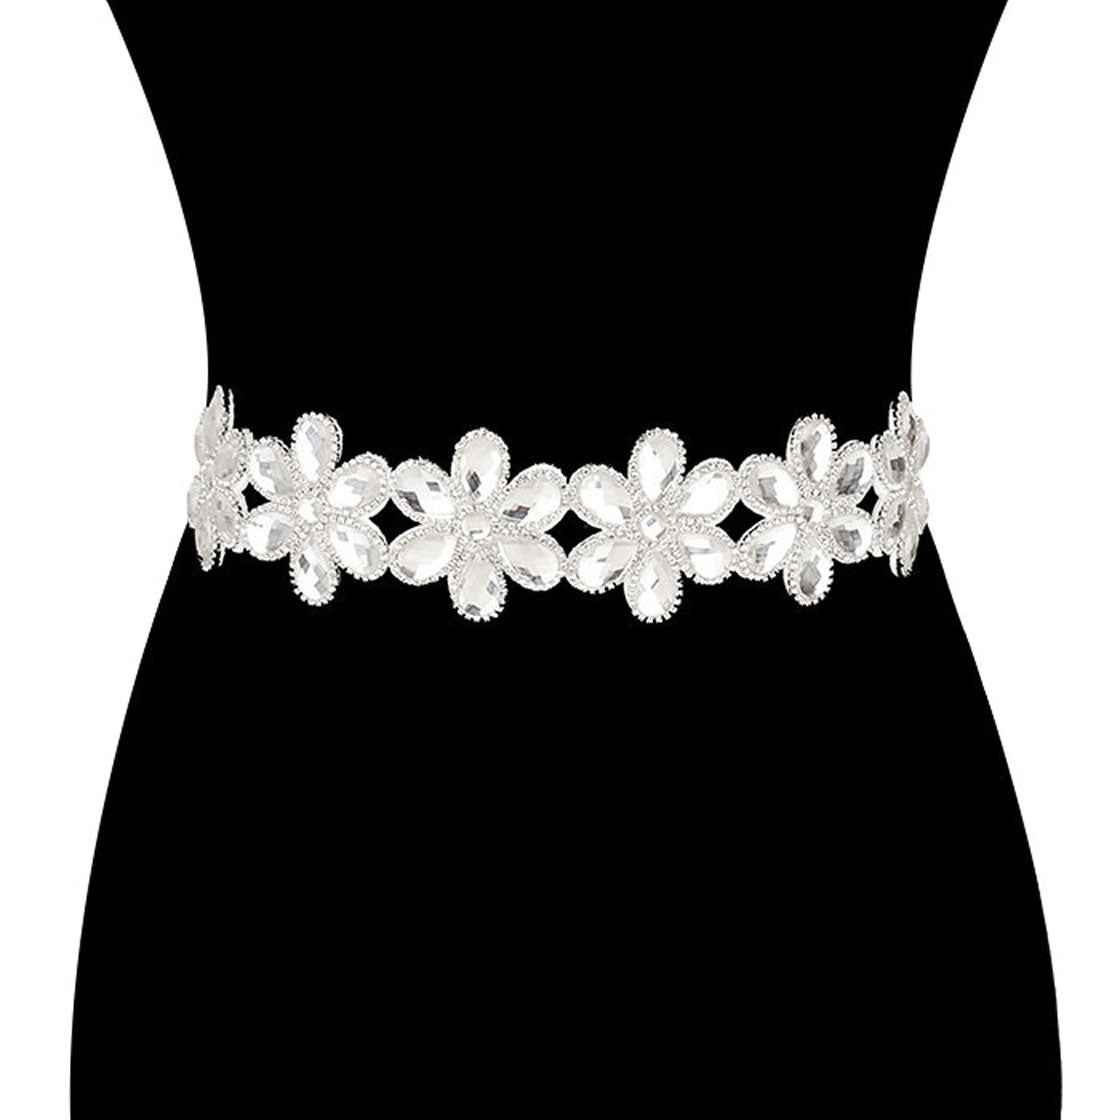 Silver White Glass Stone Flower Sash Ribbon Bridal Wedding Belt Headband, this sparkling Embellished Wedding Belt is exceptionally elegant, adding an exquisite detail to your wedding dress or tie it on your hair for a glamorous to any outfit. Beautiful self tie headband elevating your hairstyle on your super special day. Placed delicately on white organza ribbon, long enough to fit comfortably around your waist.